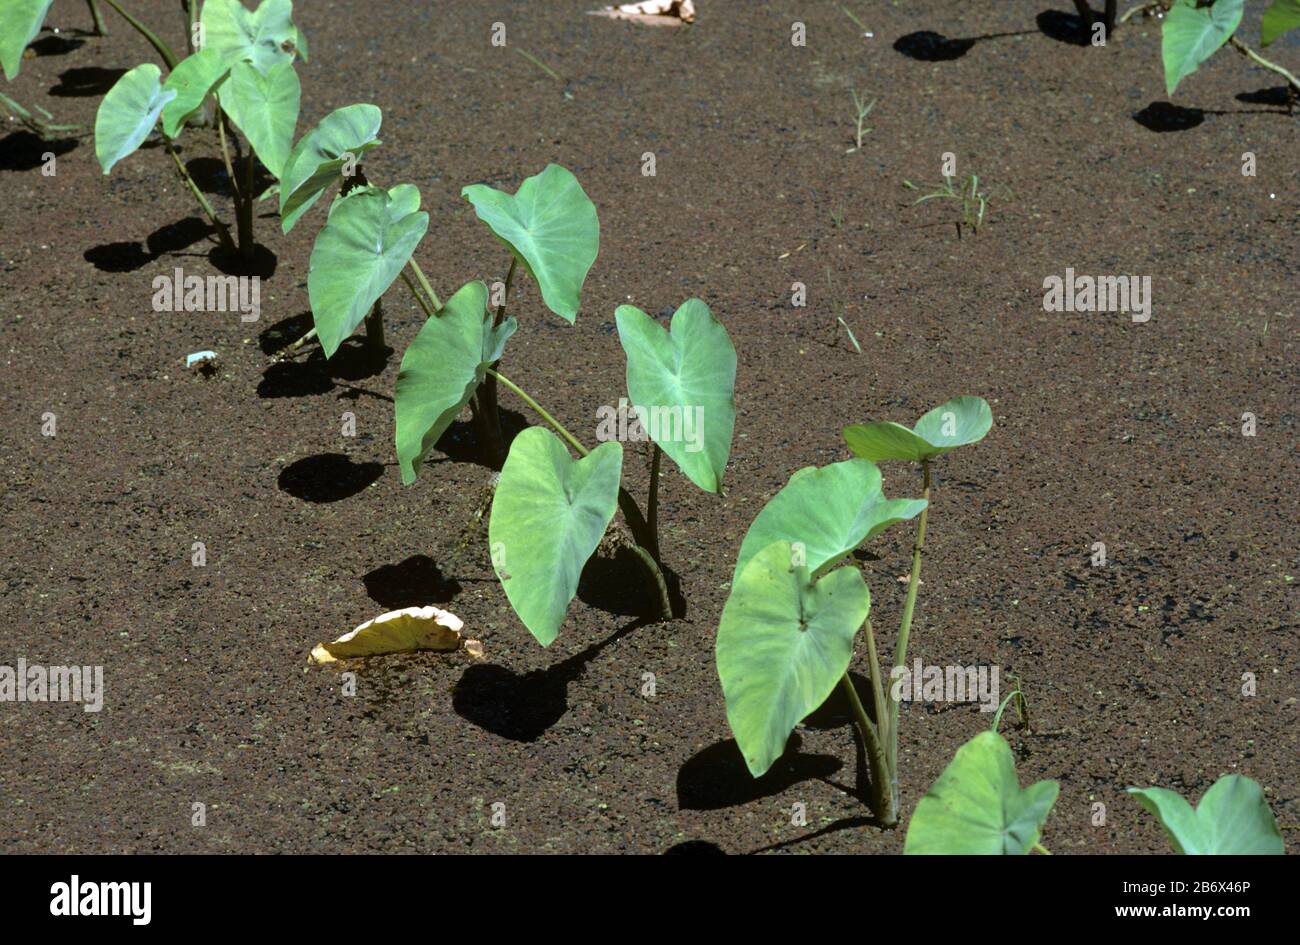 Taro, dasheen, or cocoyam (Colocasia esculenta var. antiquorum) young root vegetable plants in a paddy, Luzon, Philippines, February Stock Photo